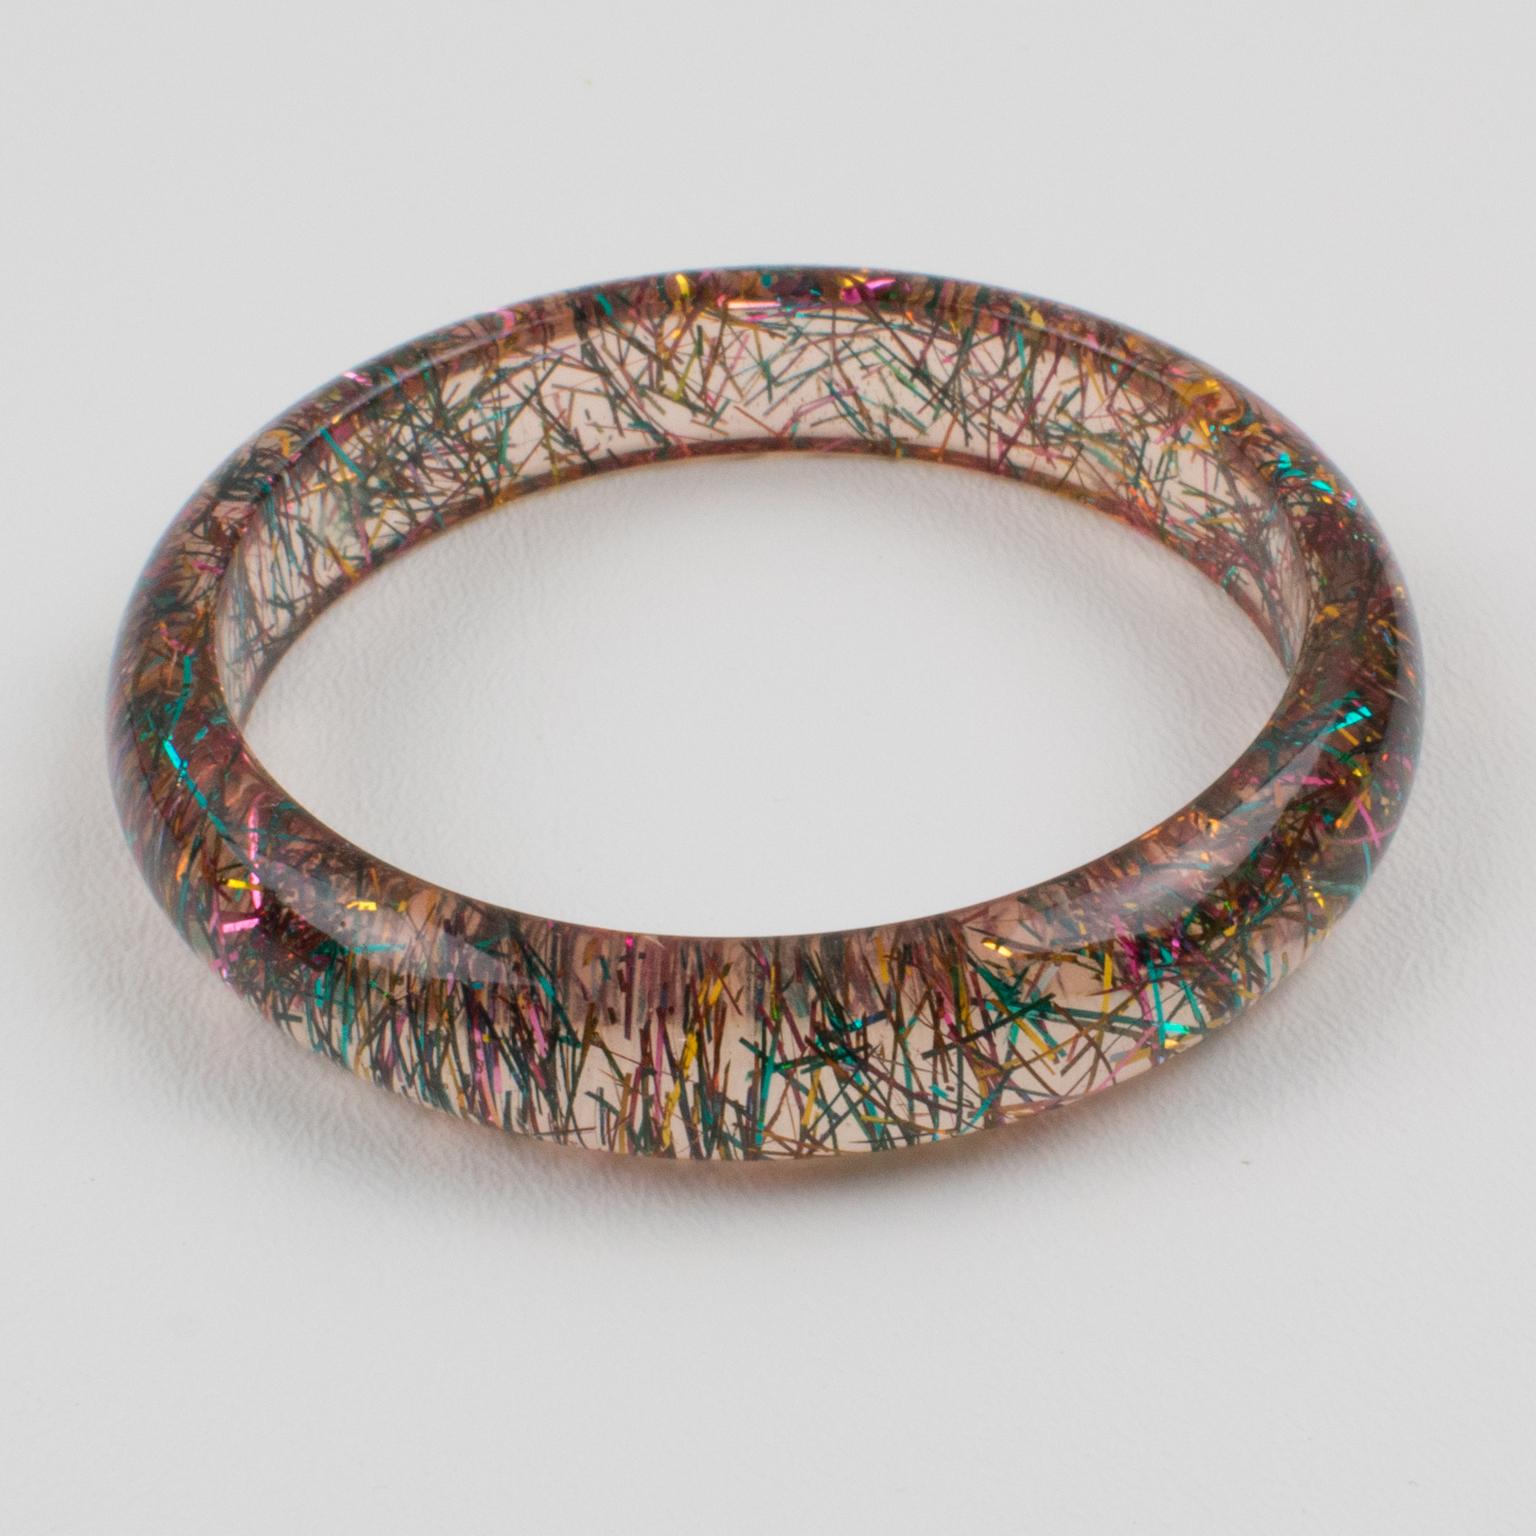 This lovely bangle bracelet has a domed shape and is made of transparent pinkish Lucite, injected with inclusions of metallic threads in multicolored tones. The metallic threads sparkle like those of Christmas tinsels. There is no visible maker's